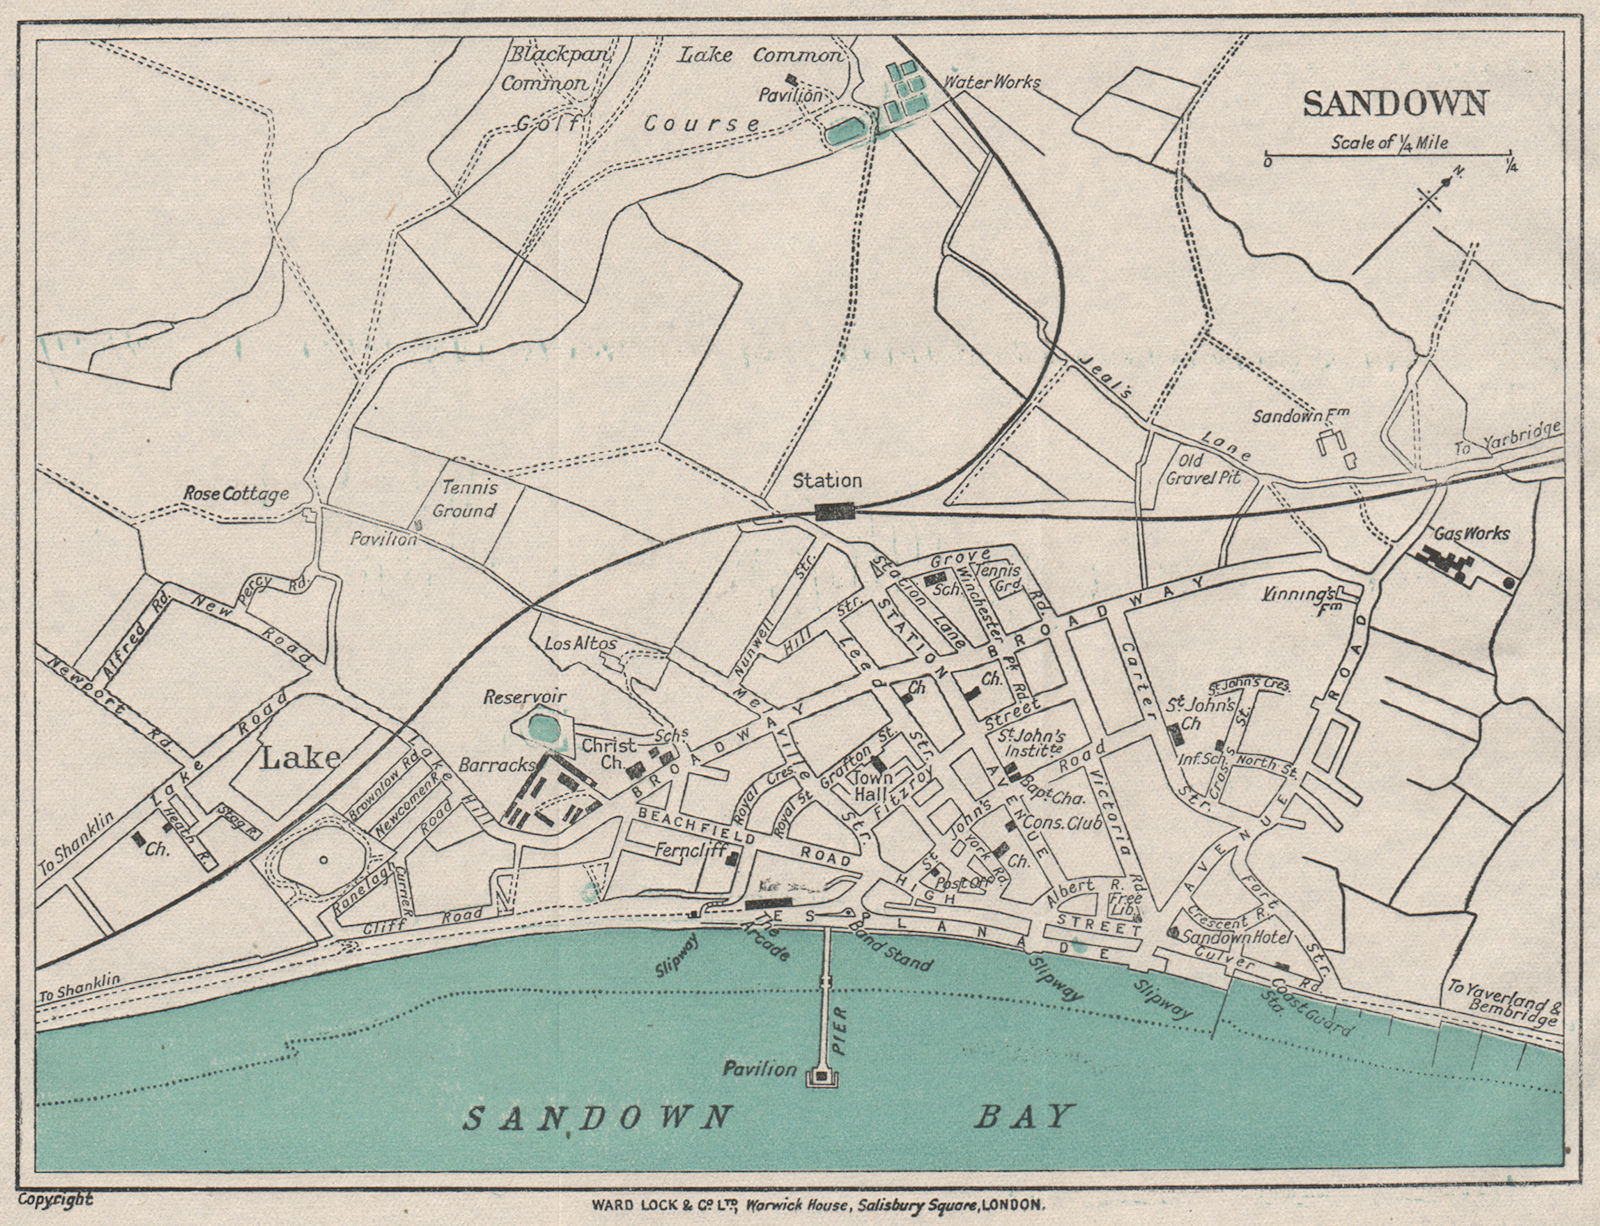 Associate Product SANDOWN vintage town/city plan. Isle of Wight. WARD LOCK 1922 old antique map